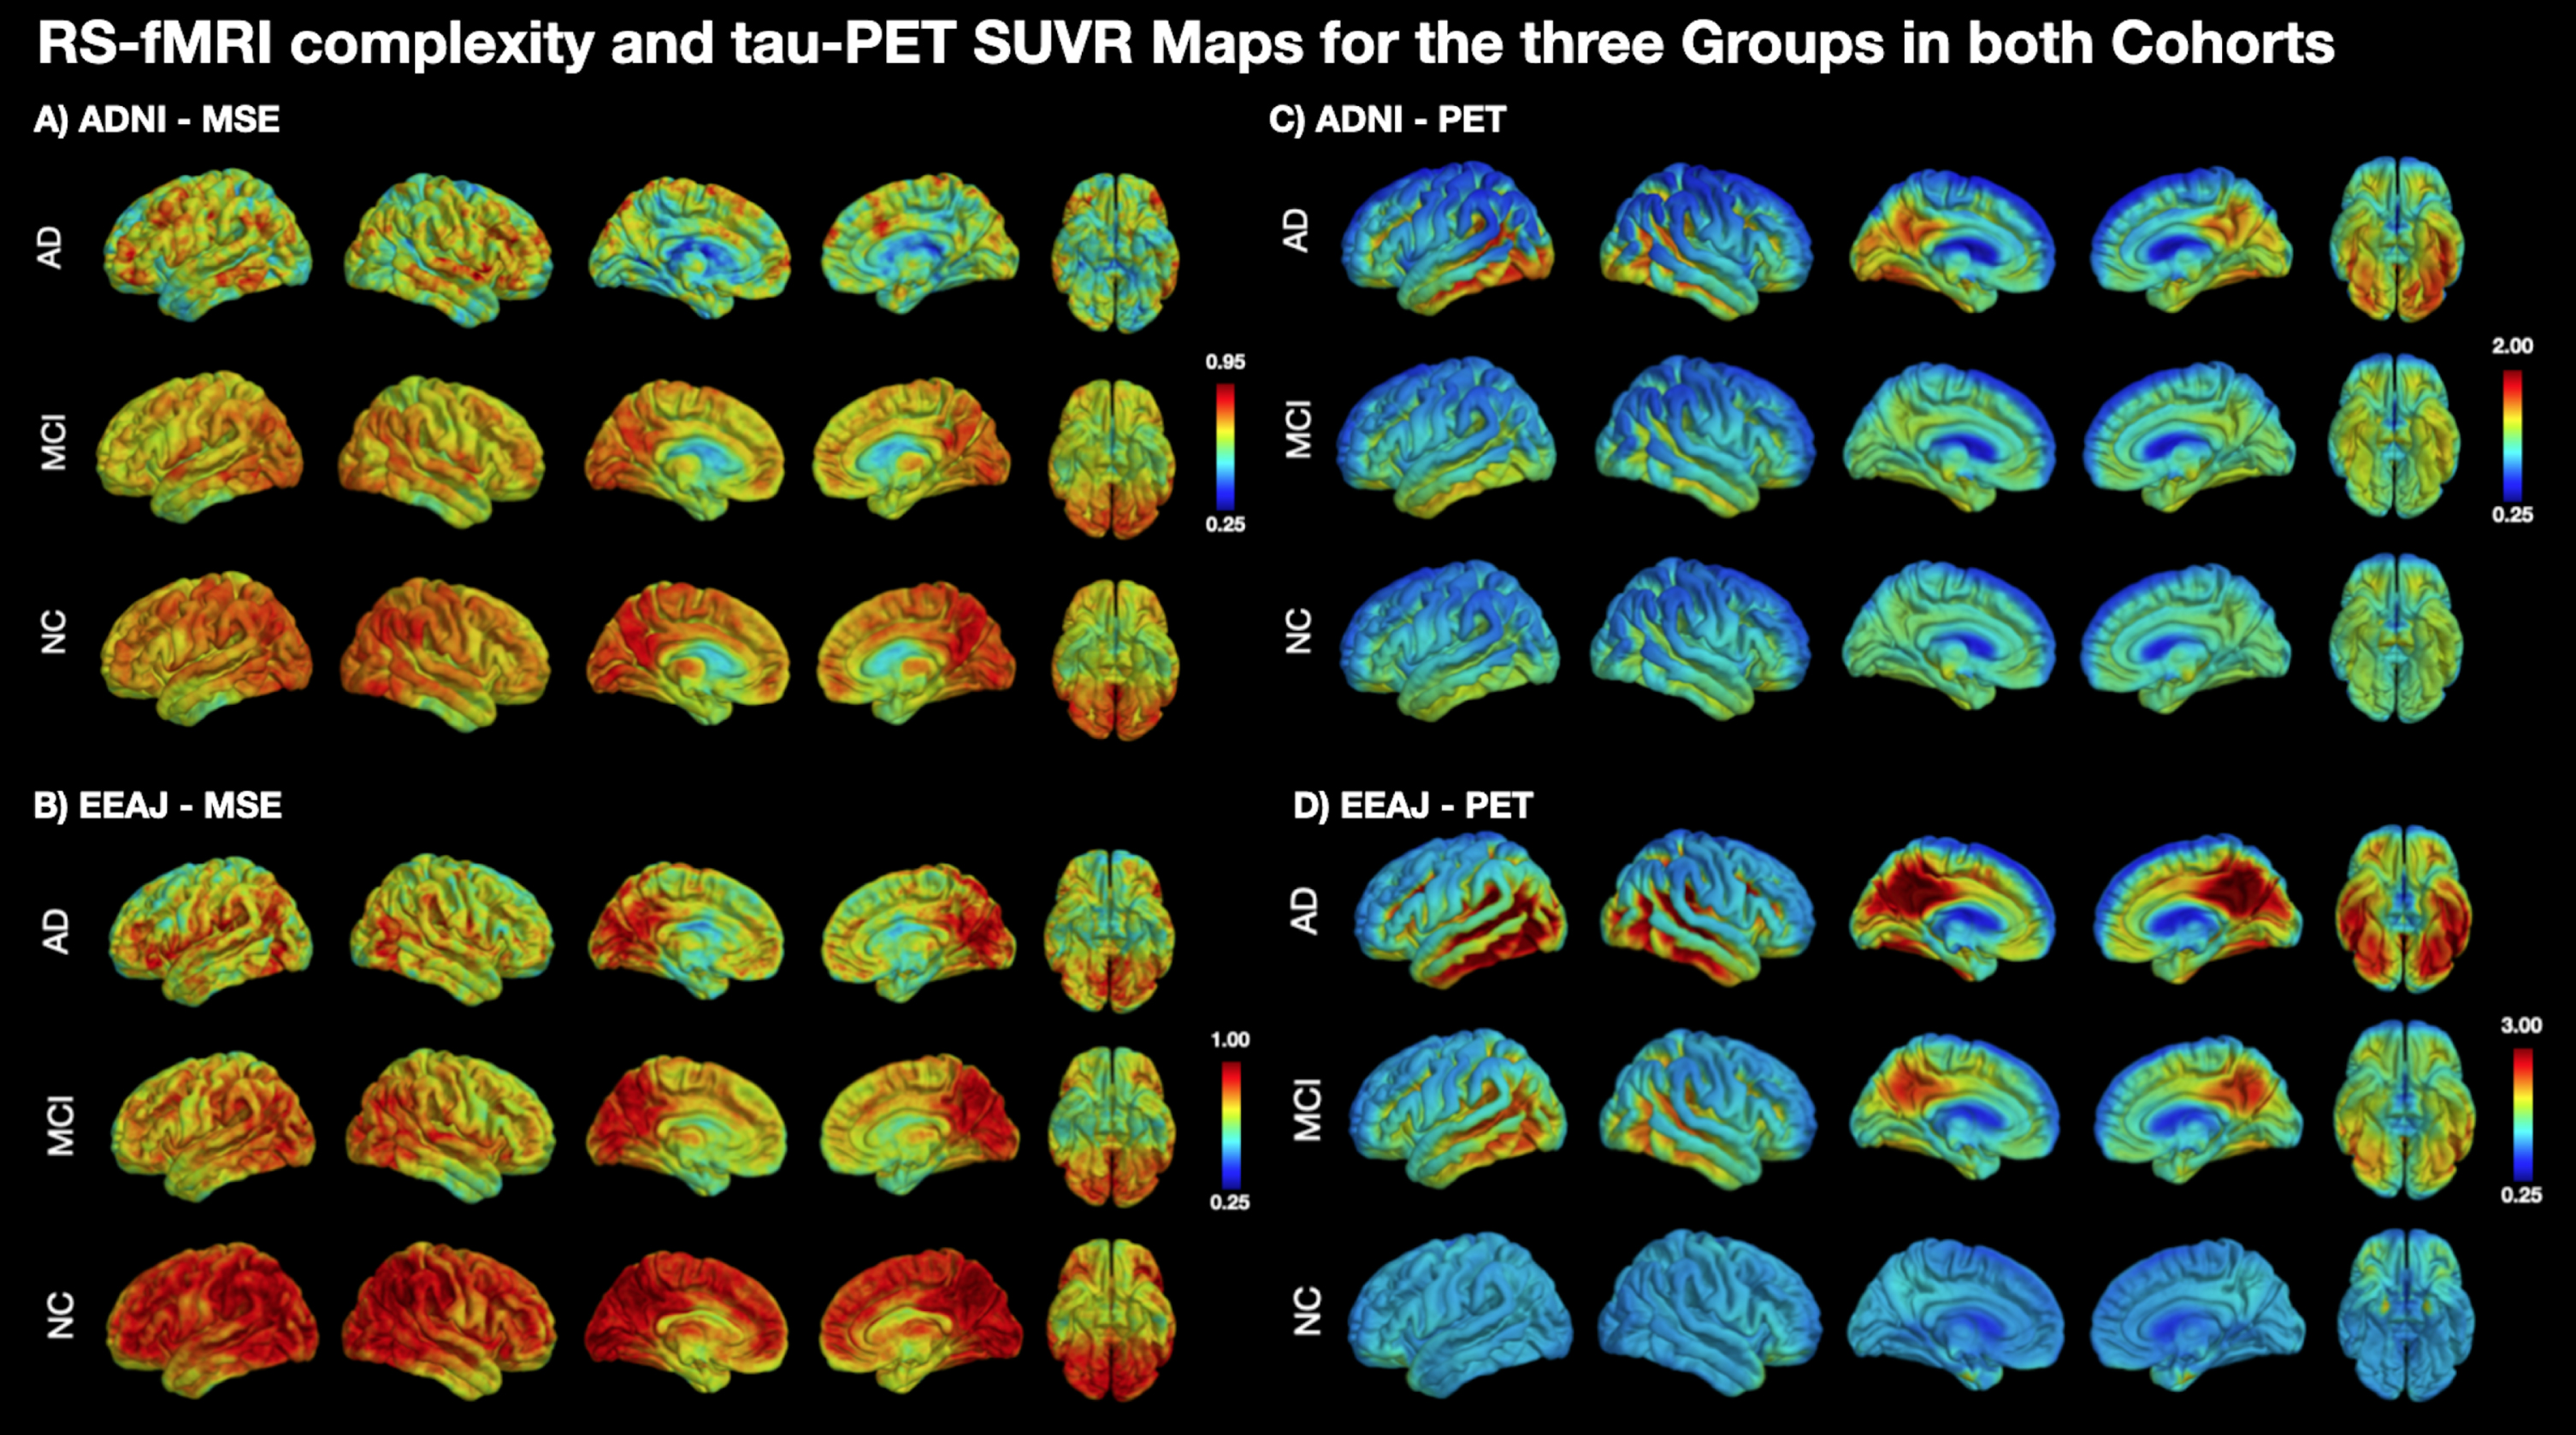 Mean maps for rs-fMRI complexity and tau-PET SUVR in subgroups of both cohorts. CN, cognitively normal; MCI, mild cognitive impairment; AD, Alzheimer’s disease; MSE, multi-scale entropy.